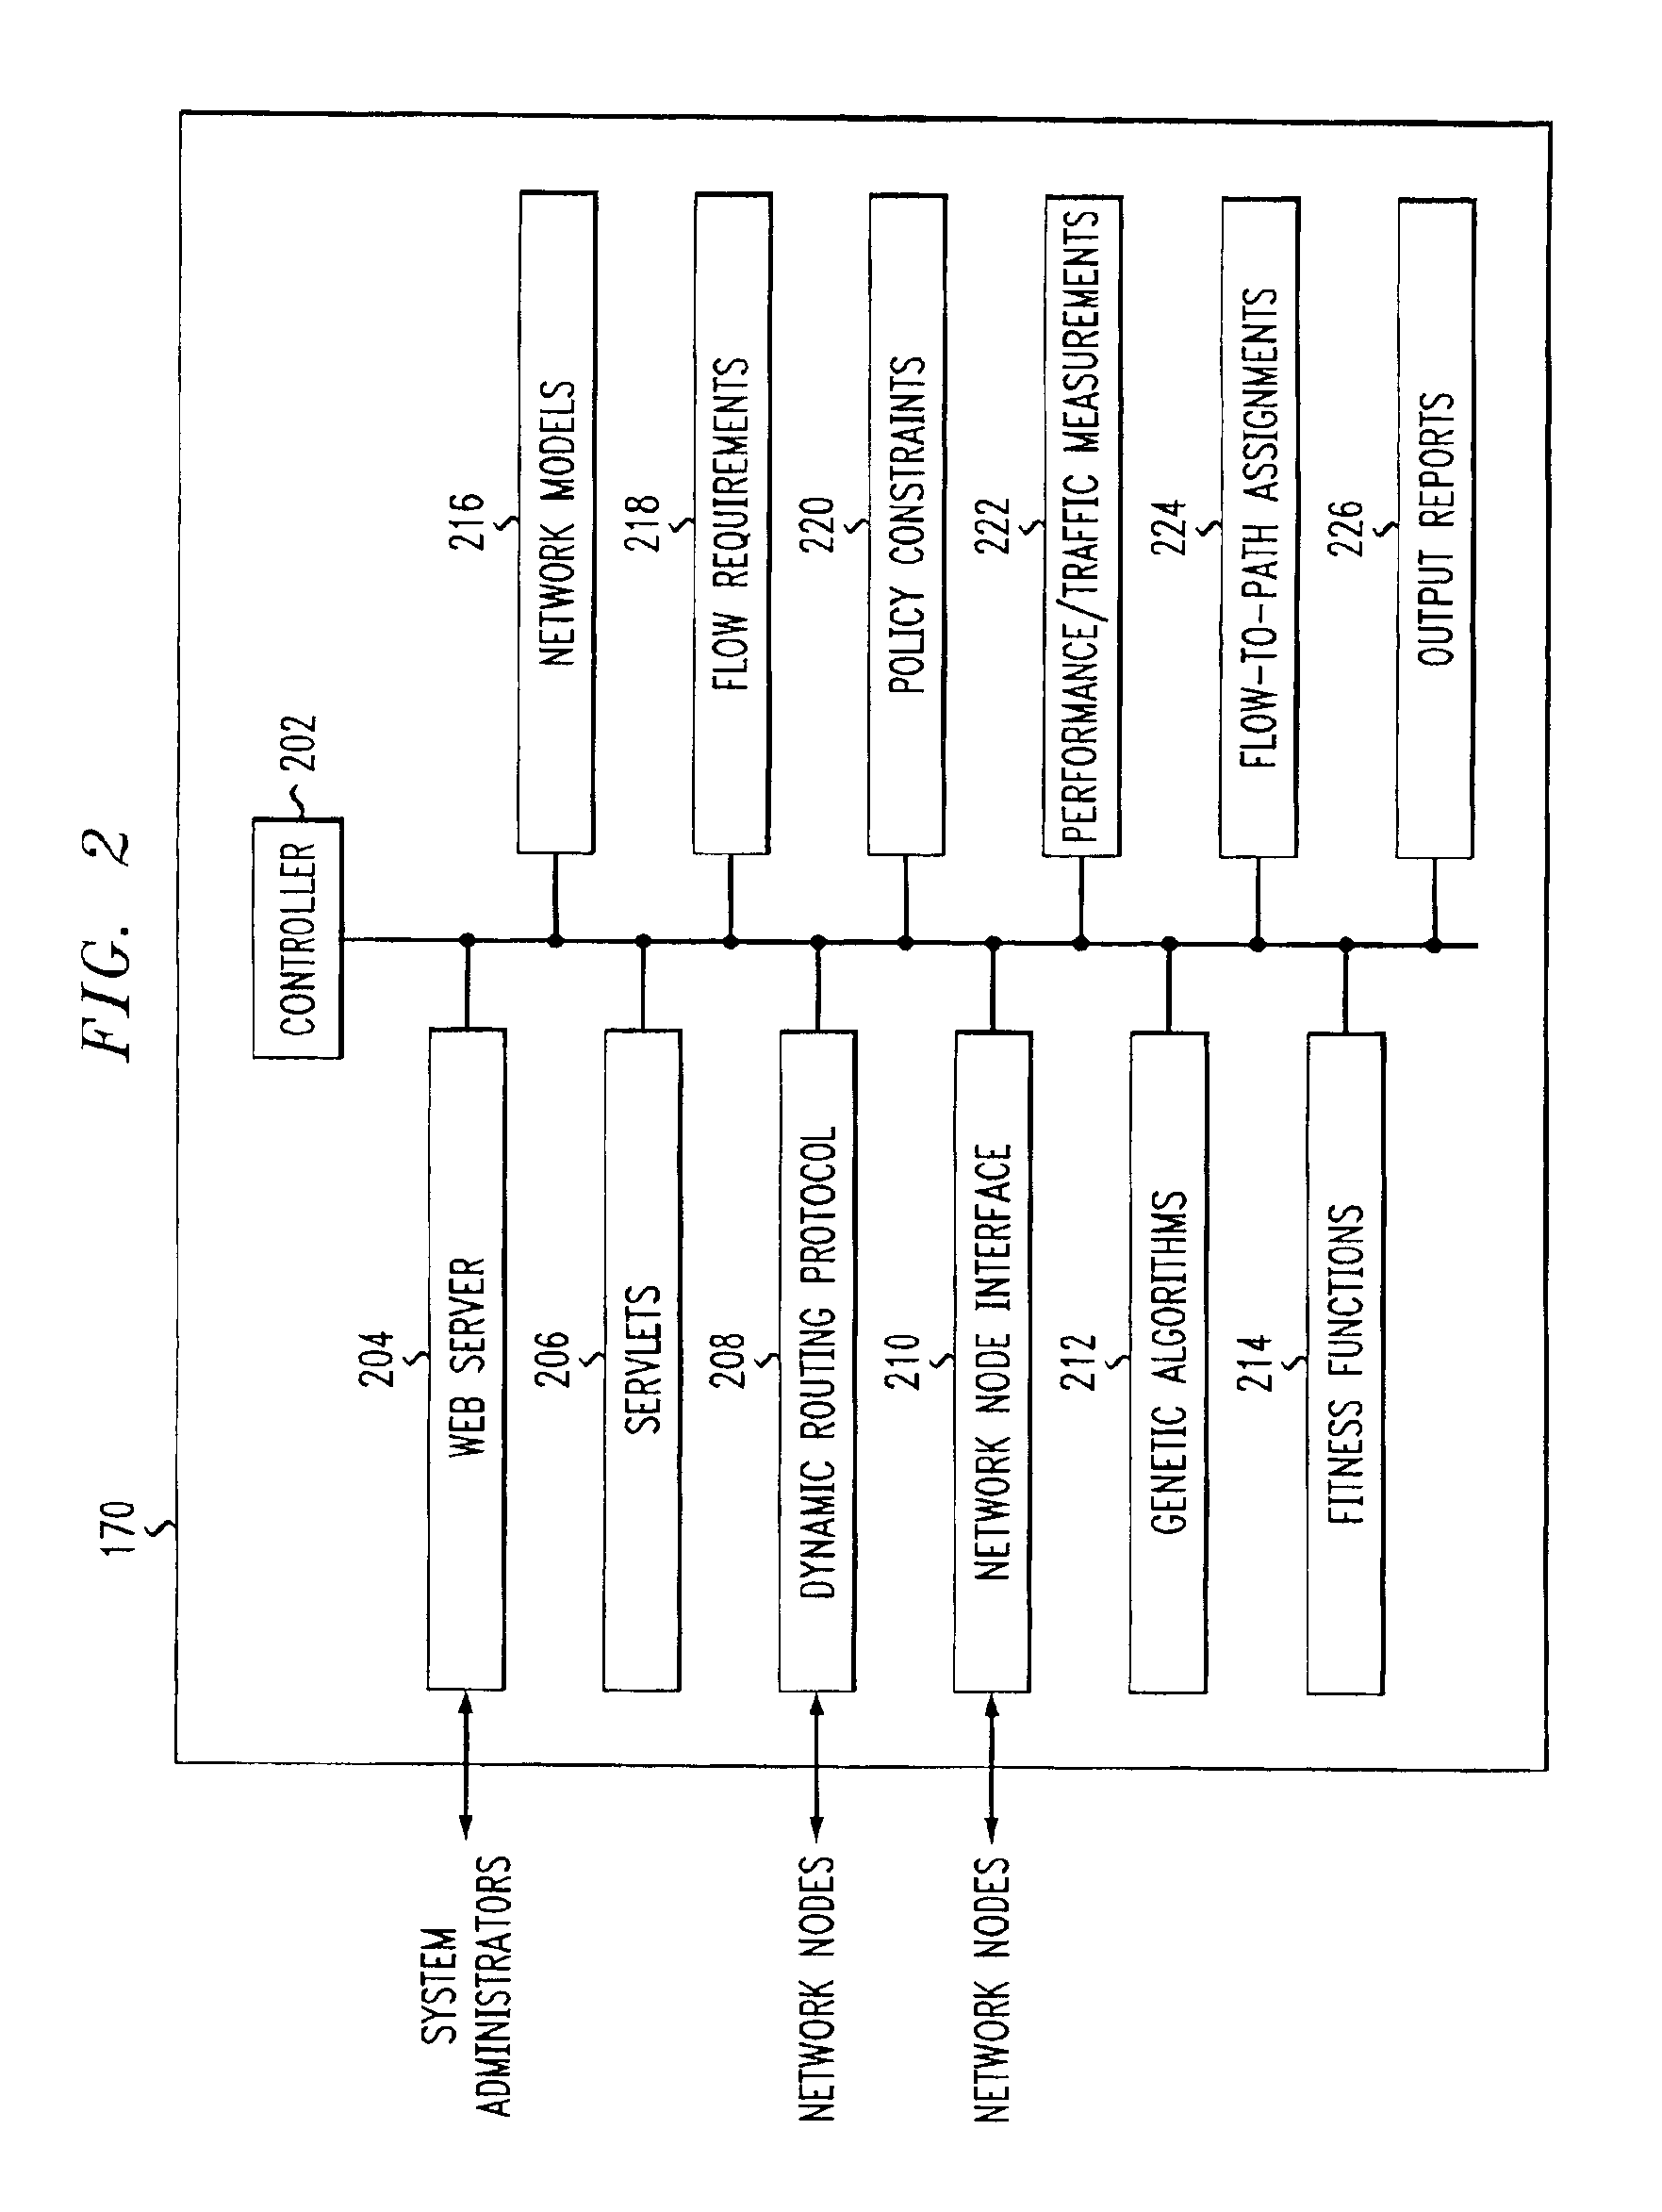 Method for utilizing a generic algorithm to provide constraint-based routing of packets in a communication network